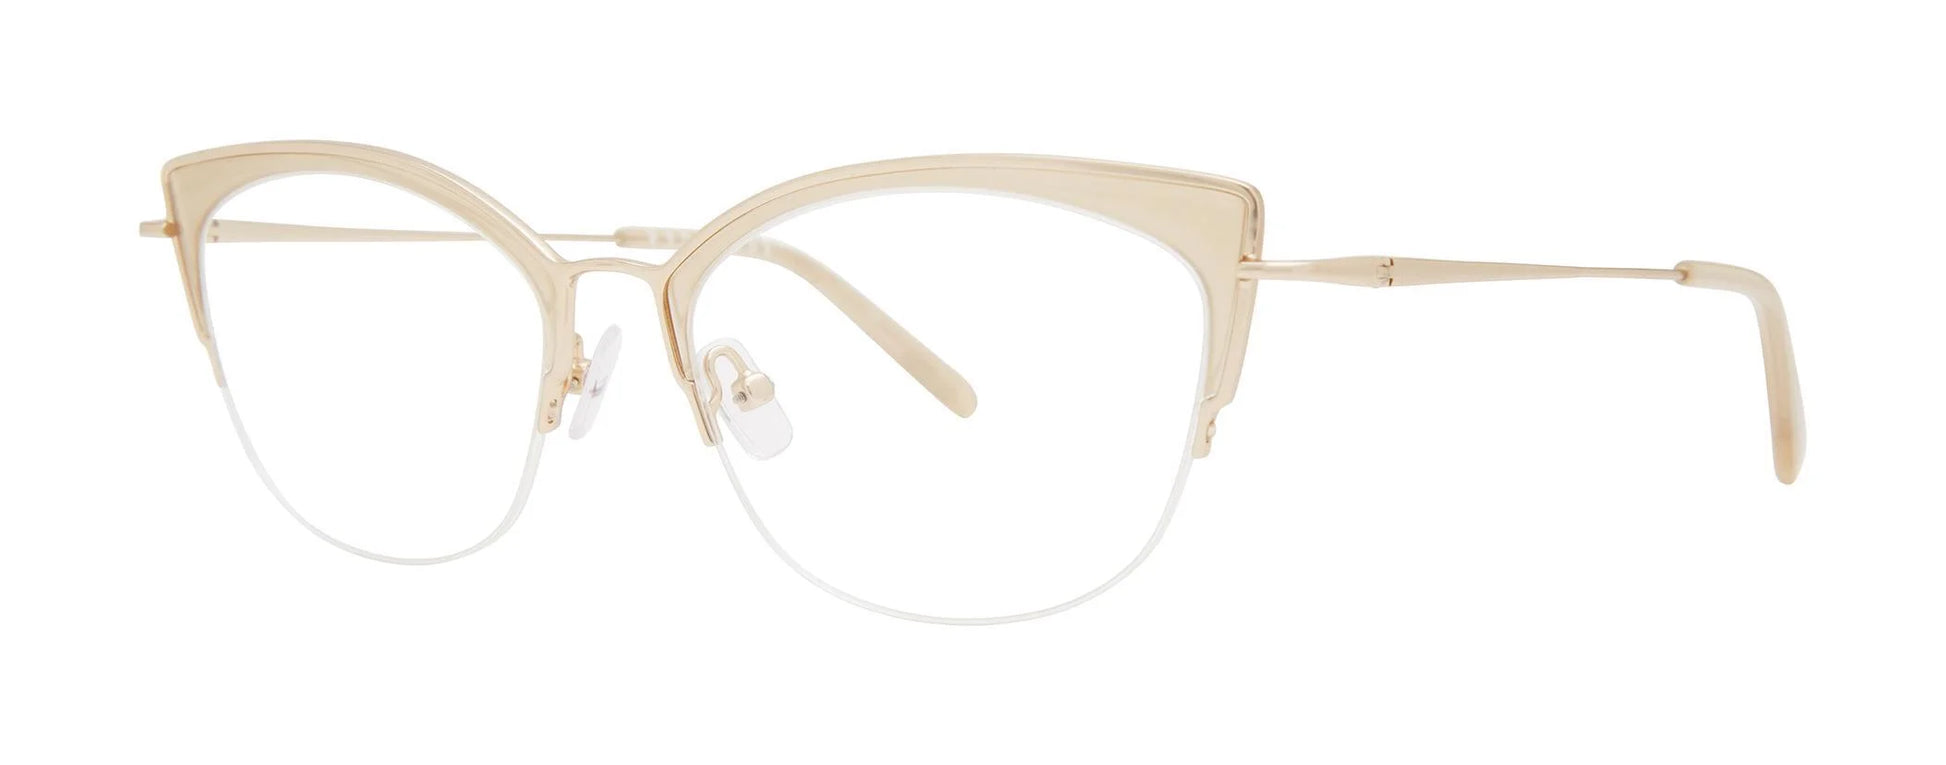 Red Rose COSENZA Eyeglasses Gold / Taupe